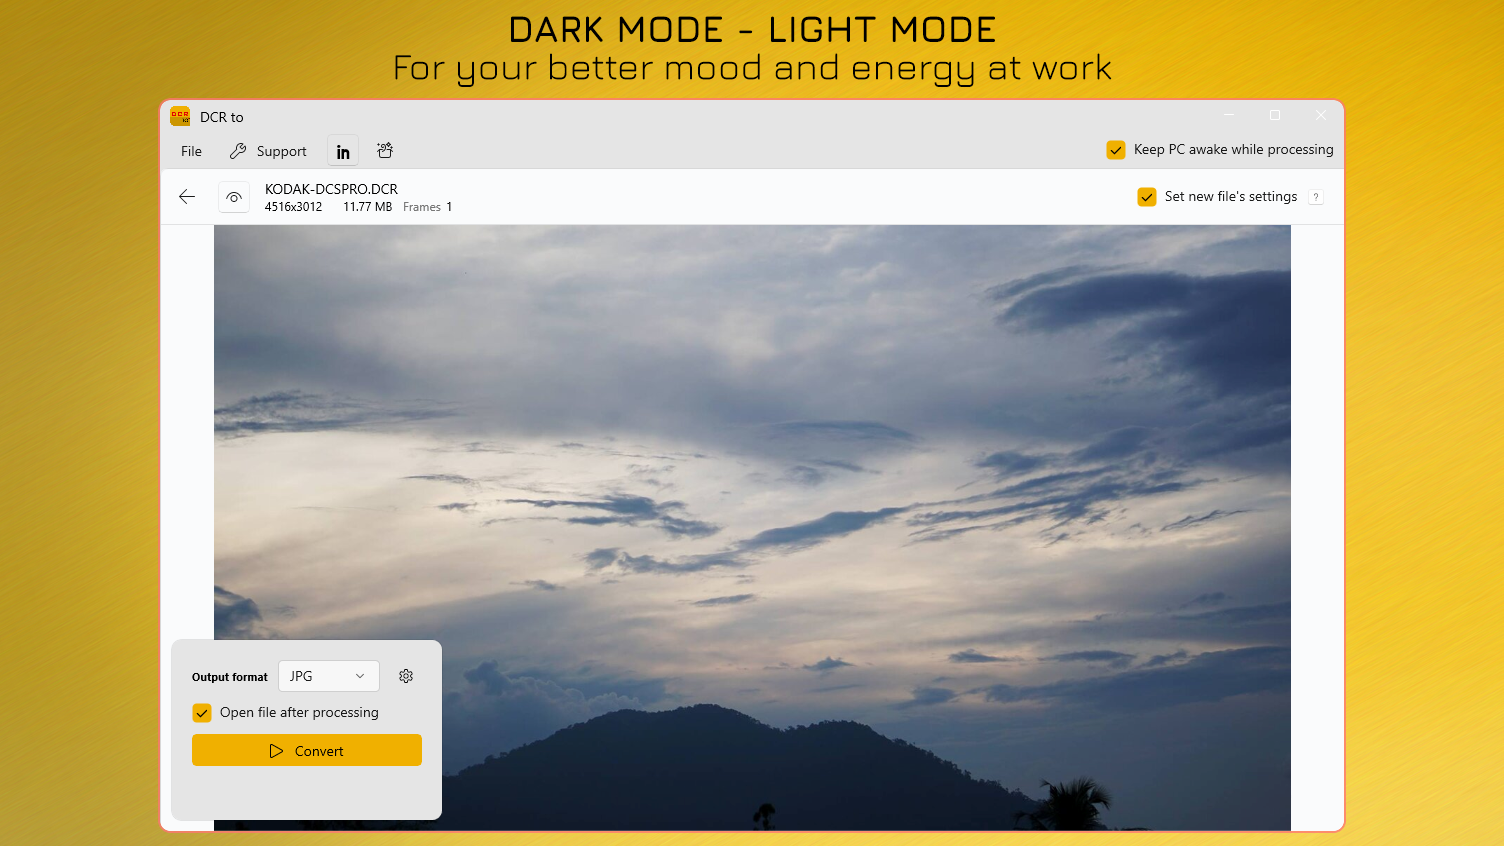 Dark Mode - Light Mode - For your better mood and an energy working day.